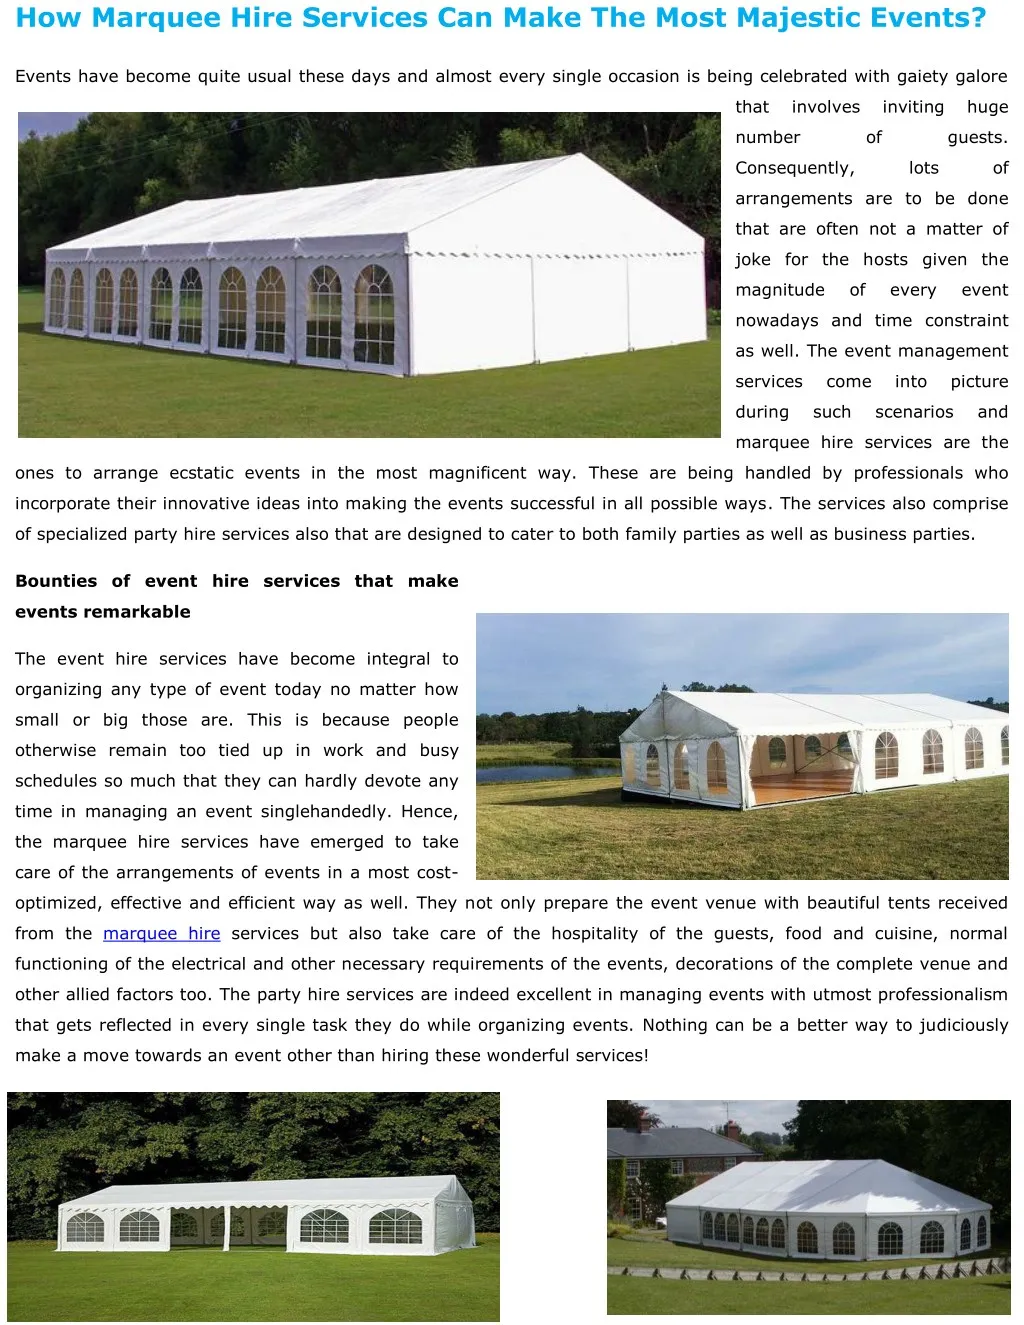 how marquee hire services can make the most